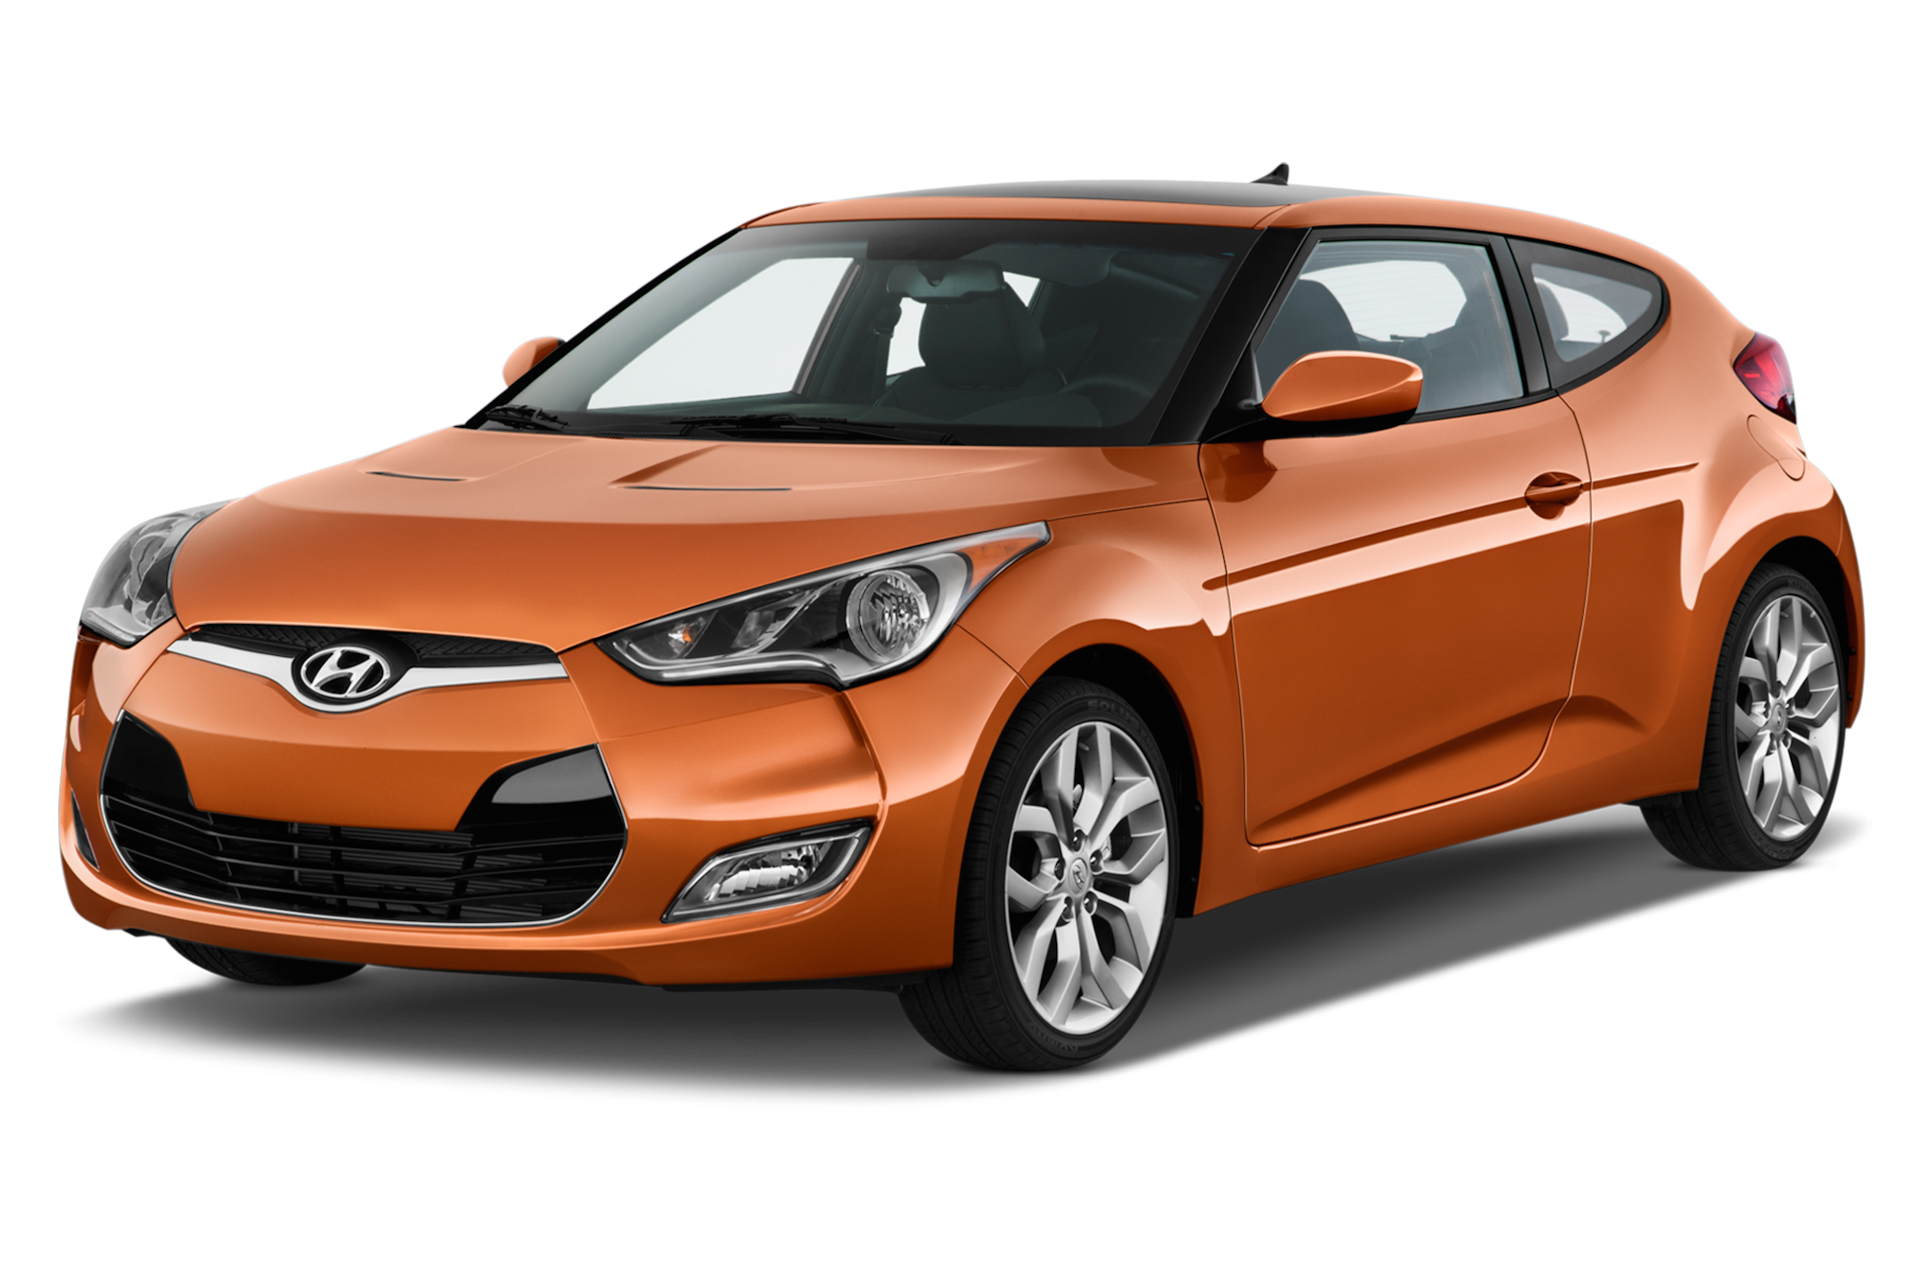 2013 Hyundai Veloster Prices, Reviews, and Photos - MotorTrend